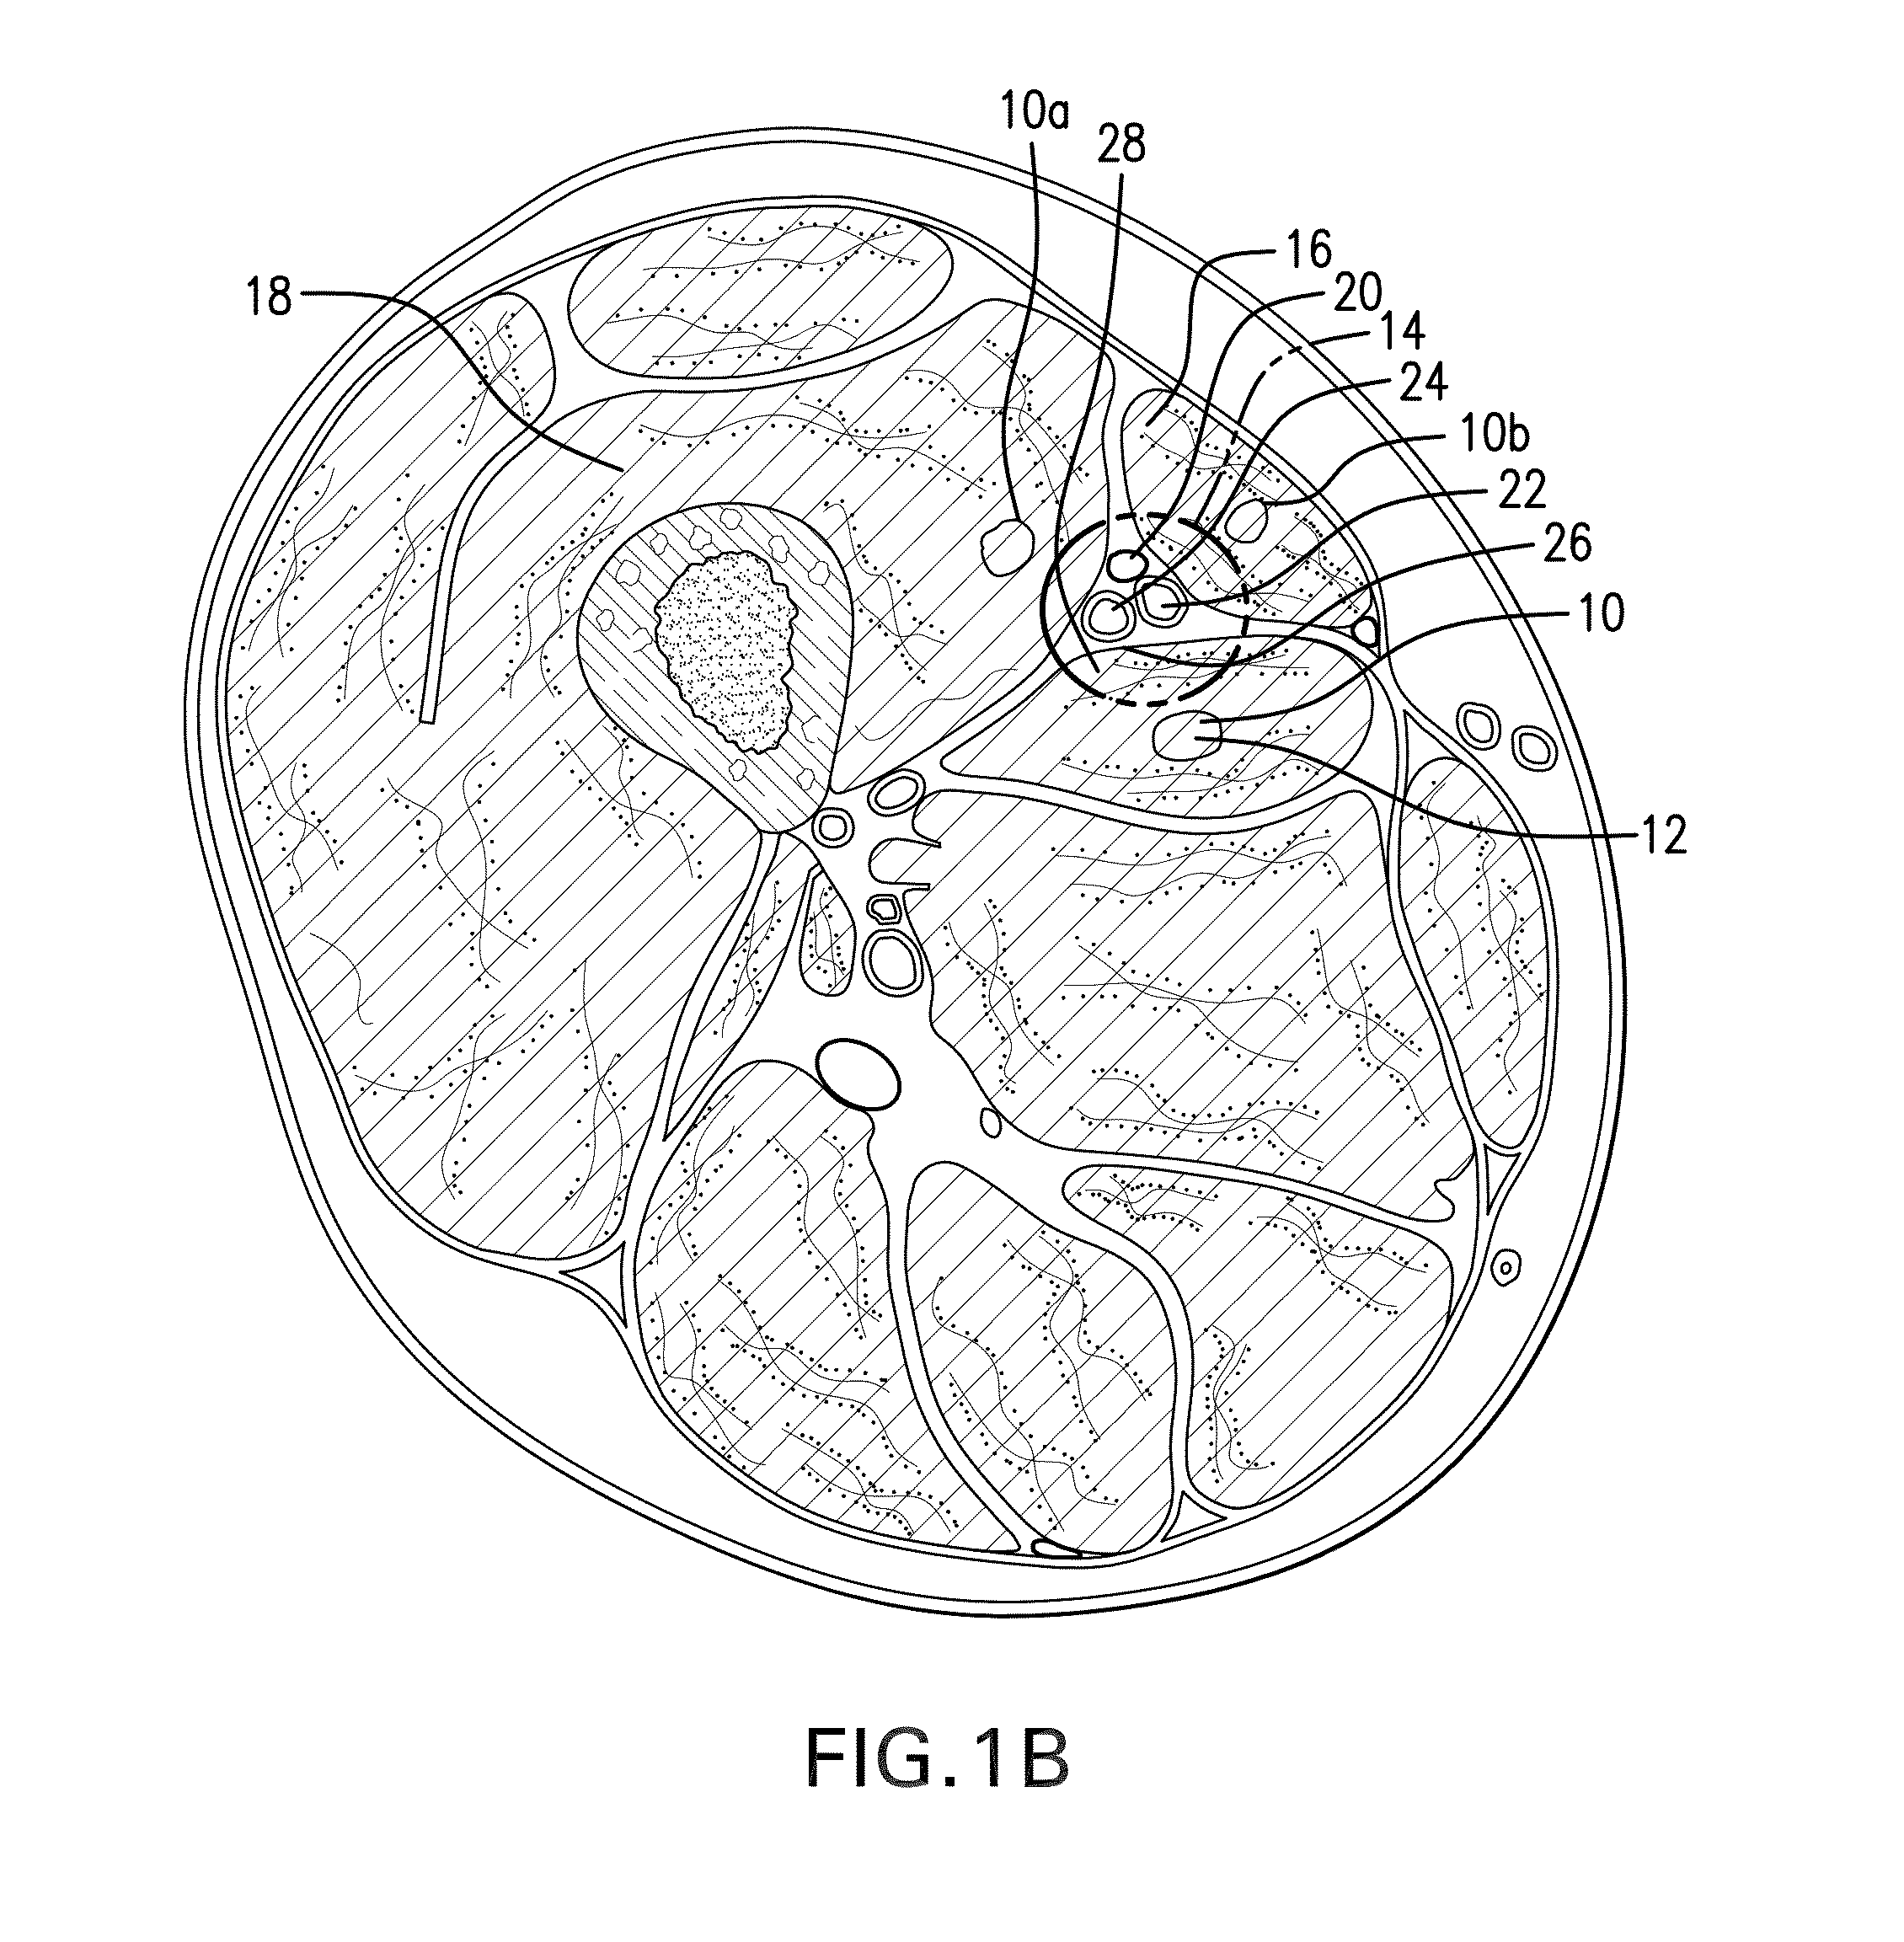 Method for Treating and Confirming Diagnosis of Exertional Compartment Syndrome